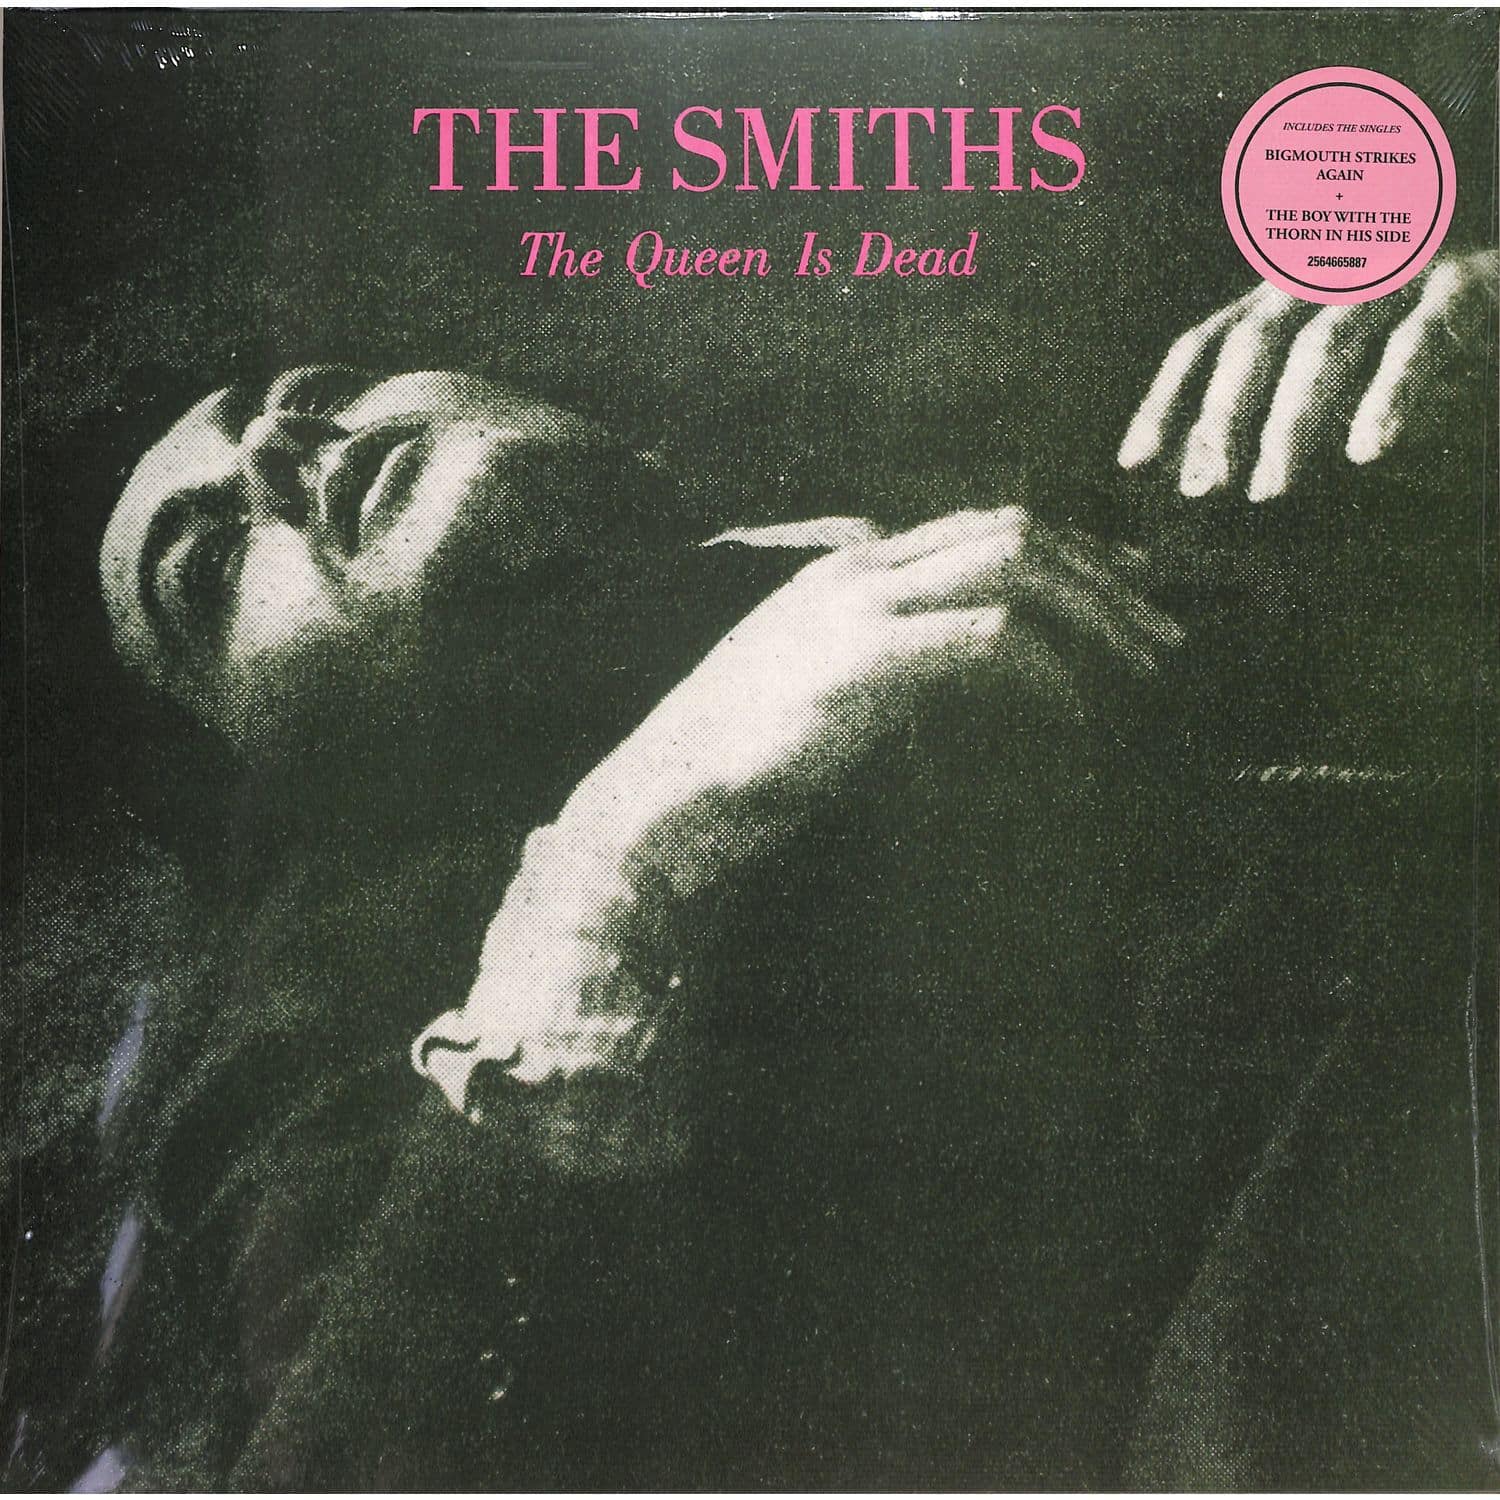 The Smiths - THE QUEEN IS DEAD 